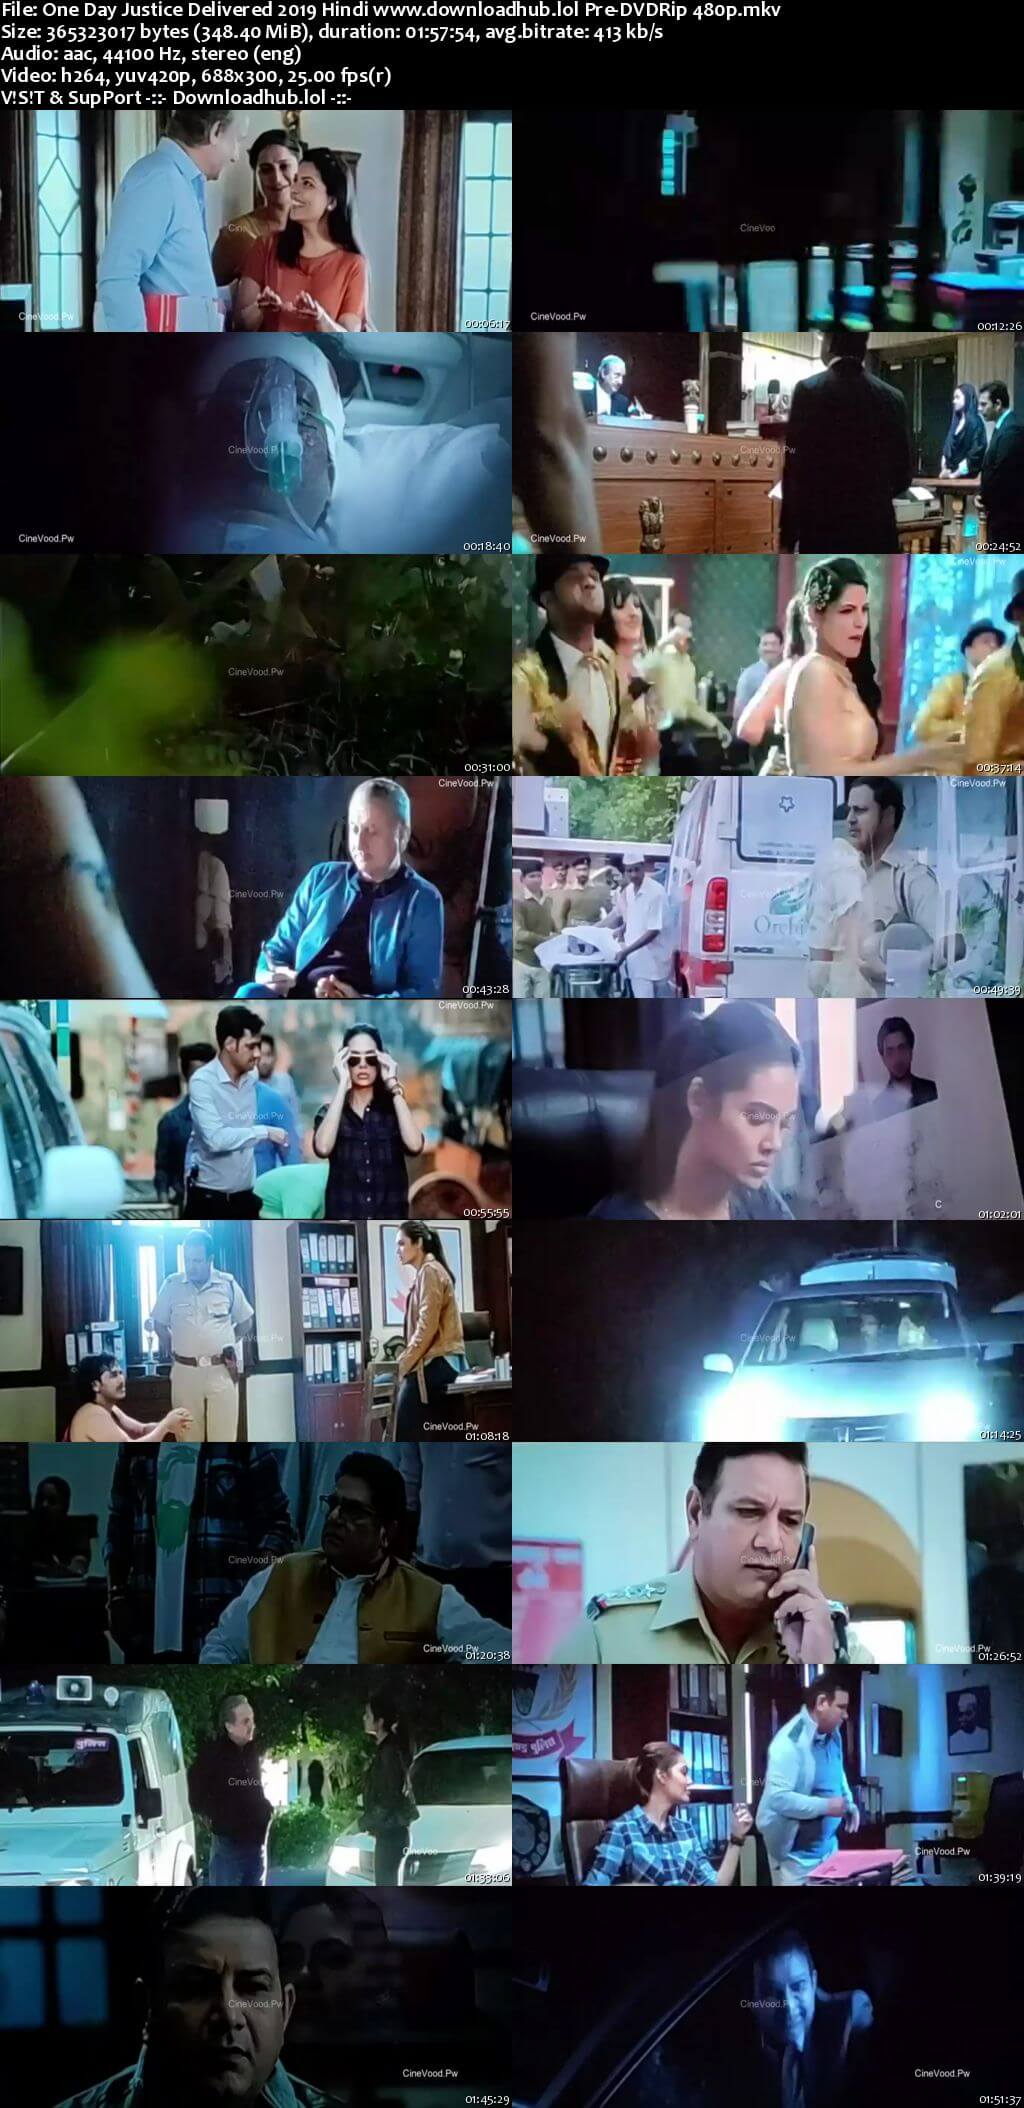 One Day Justice Delivered 2019 Hindi 350MB Pre-DVDRip 480p